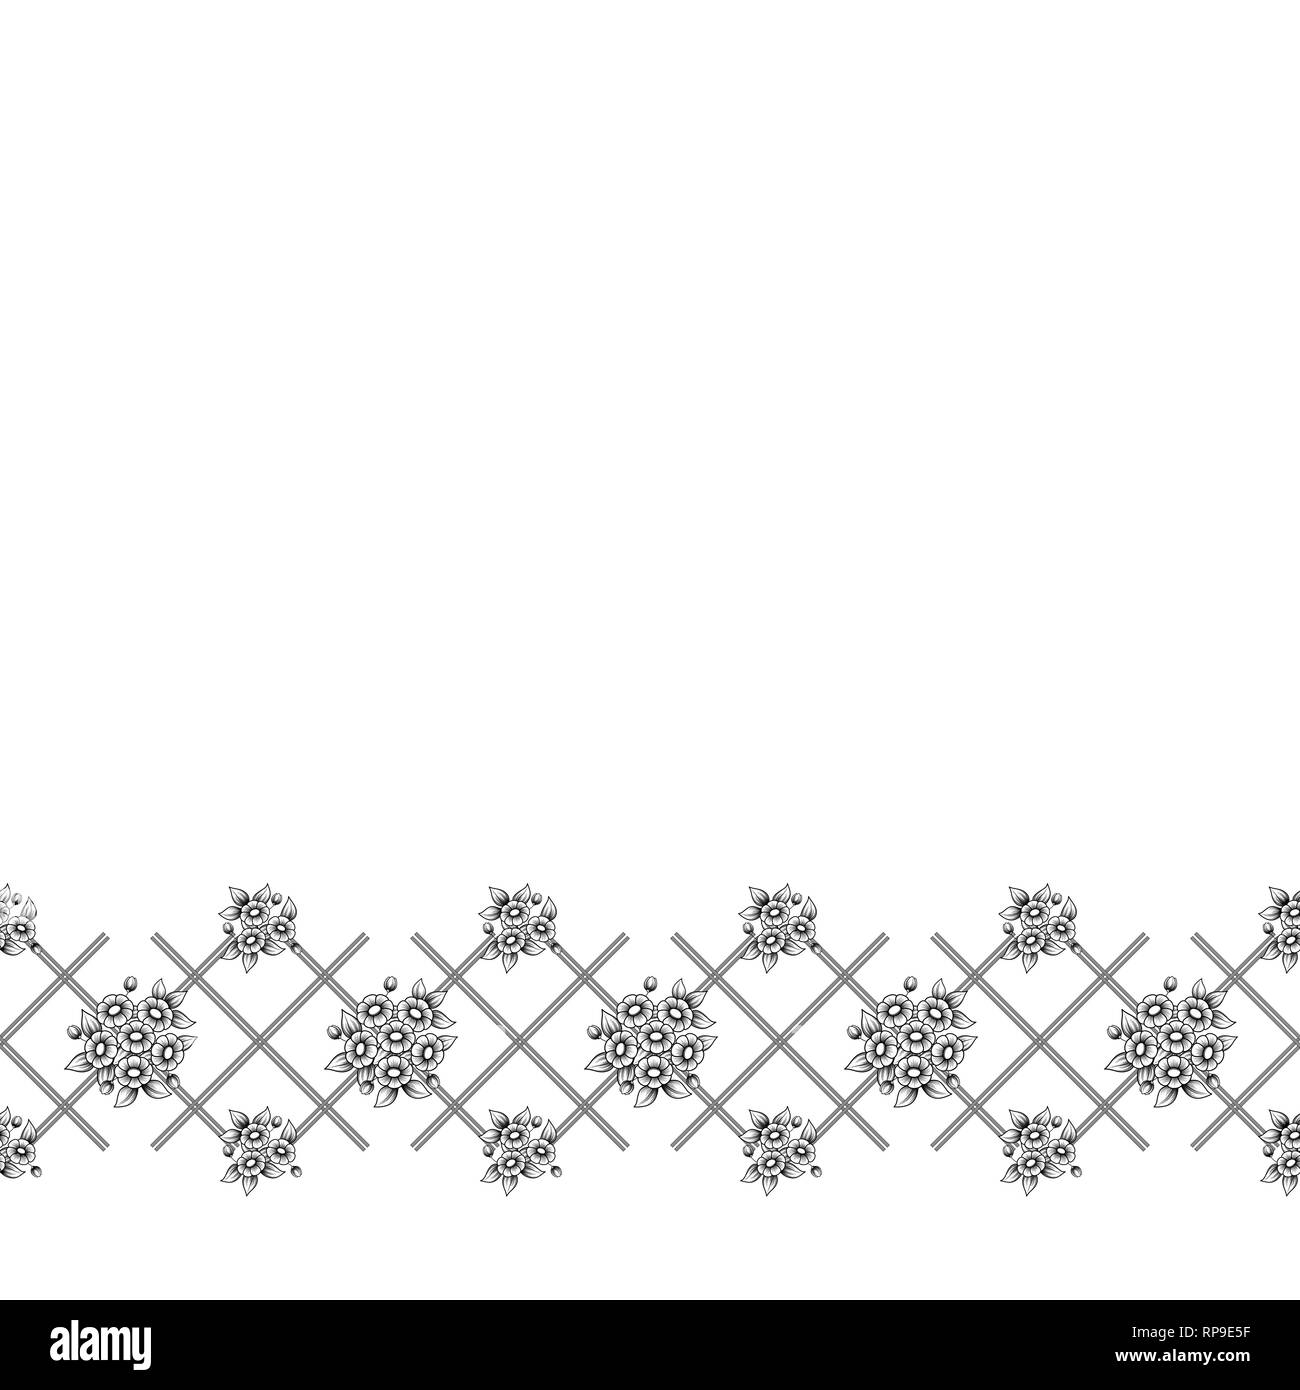 Black outline floral horizontal pattern isolated on white background Stock Vector